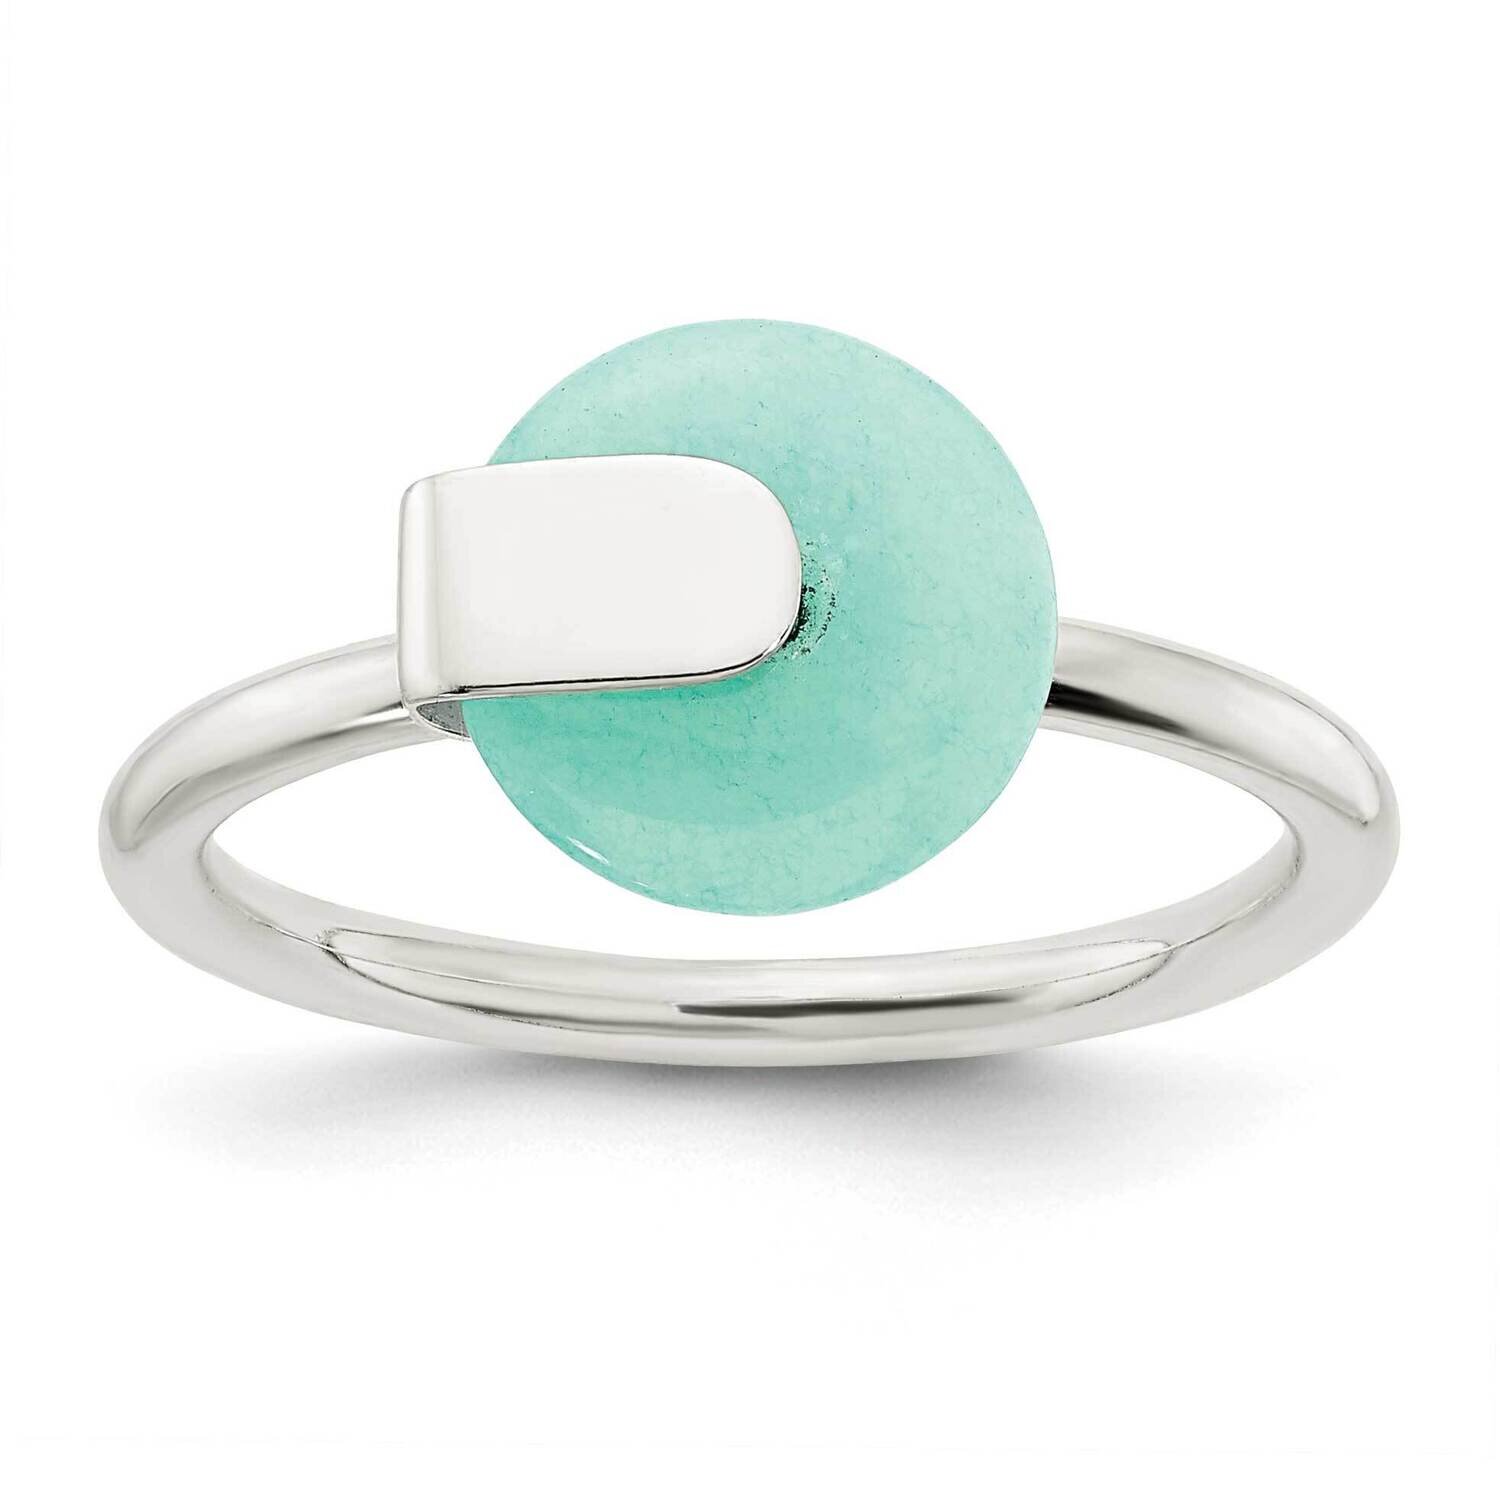 Round Imitation Turquoise Ring Sterling Silver Polished QR7338